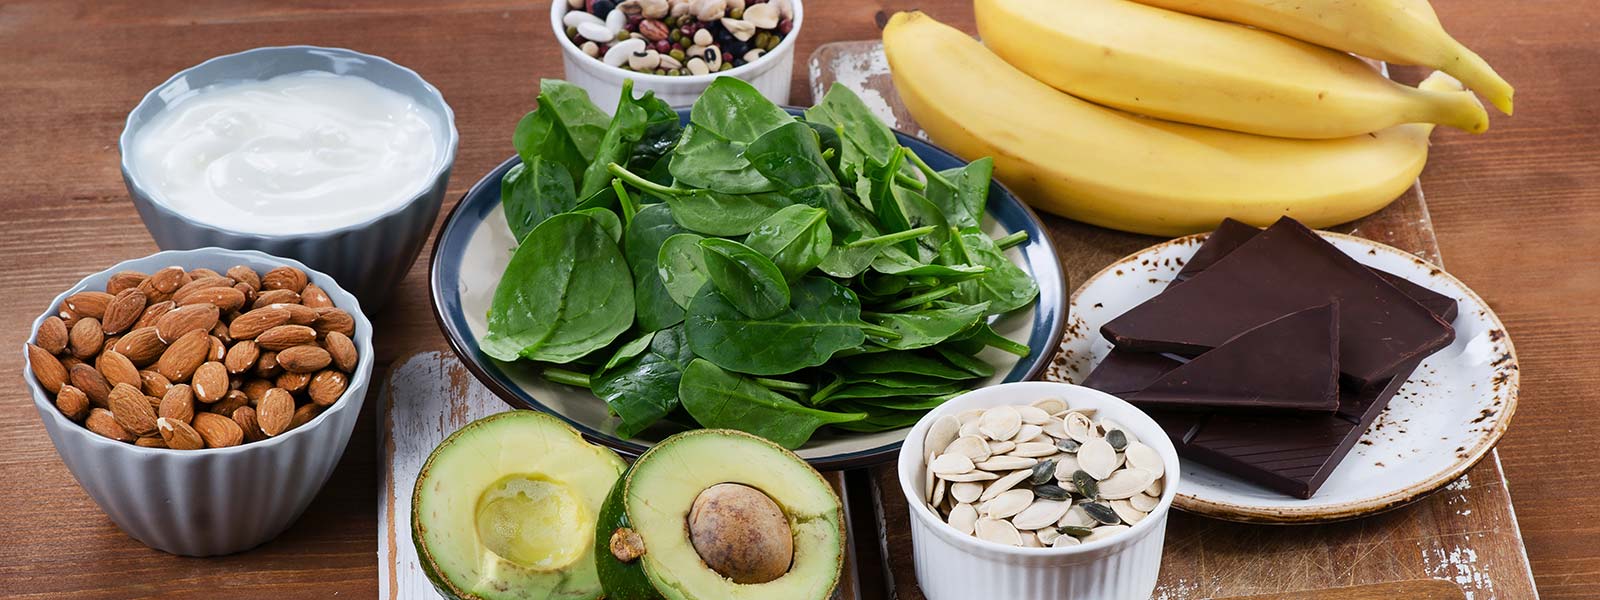 Table displayed with all Vegan Natural Foods including nuts, avacado, baby spinach, and bananas